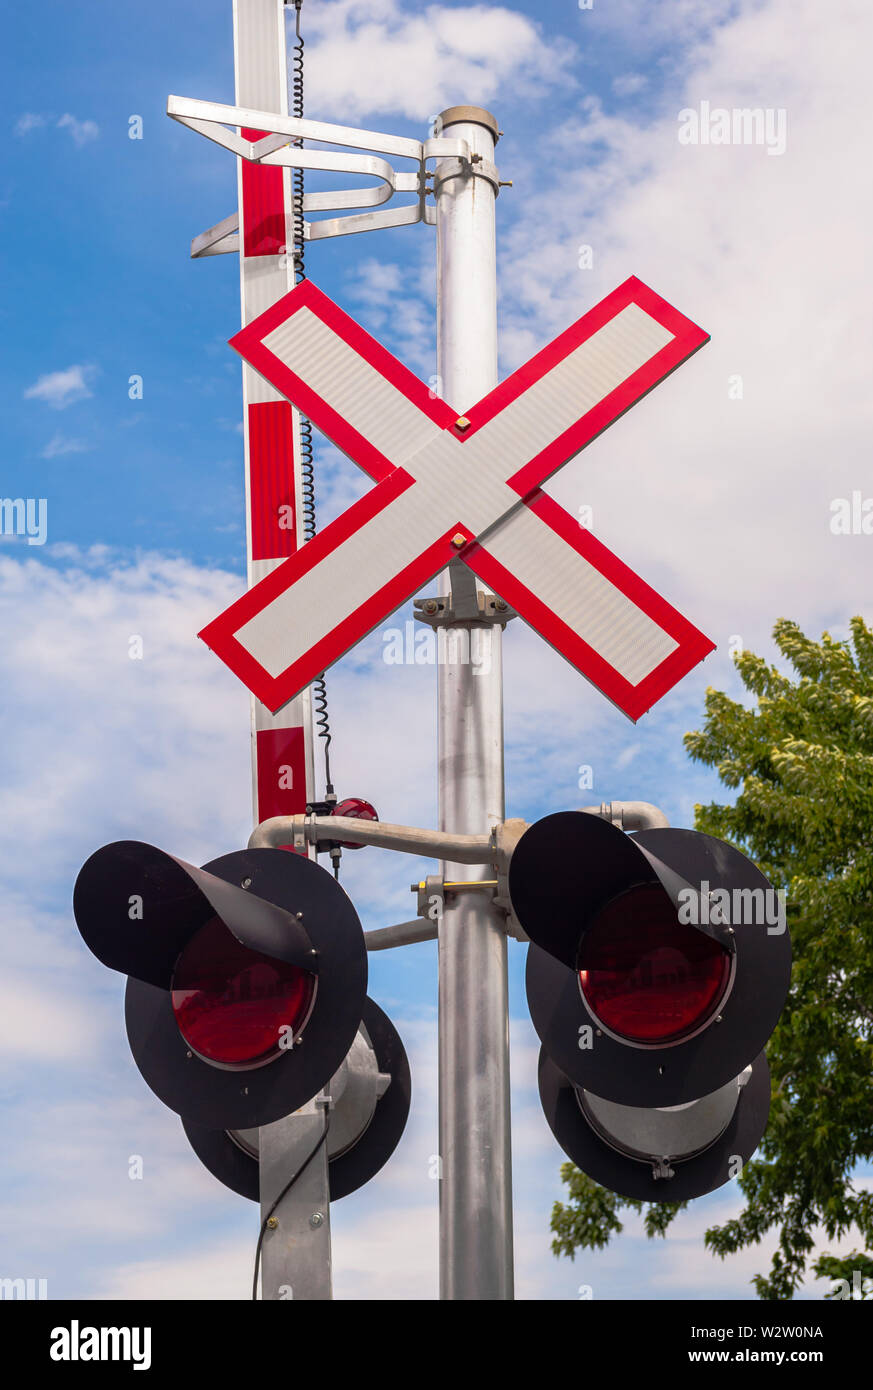 Railway crossing signals and barrier. Stock Photo